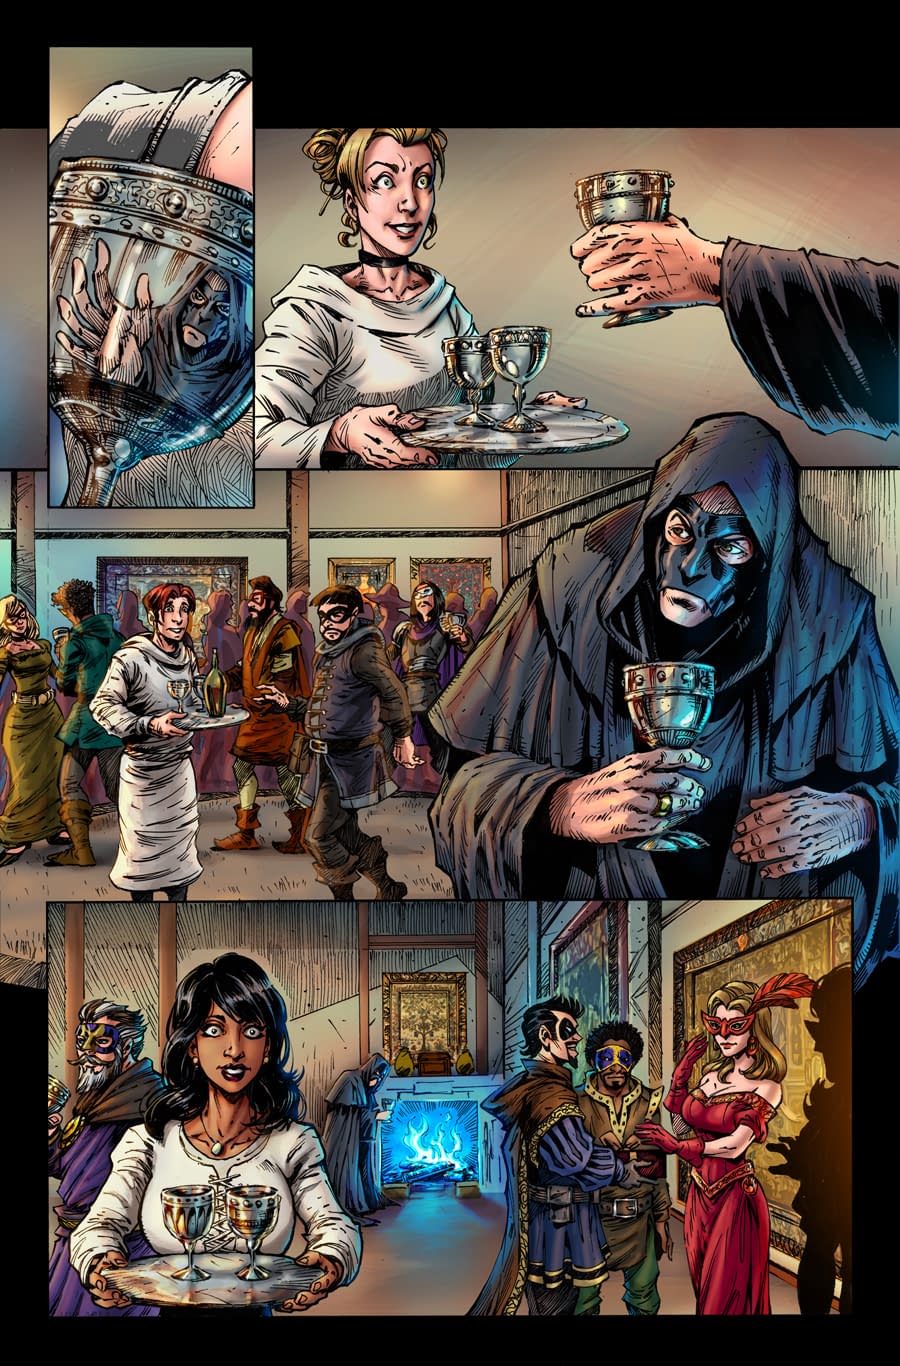 Wheel of Time: The Great Hunt #1 Preview: Darkfriends or Frenemies?